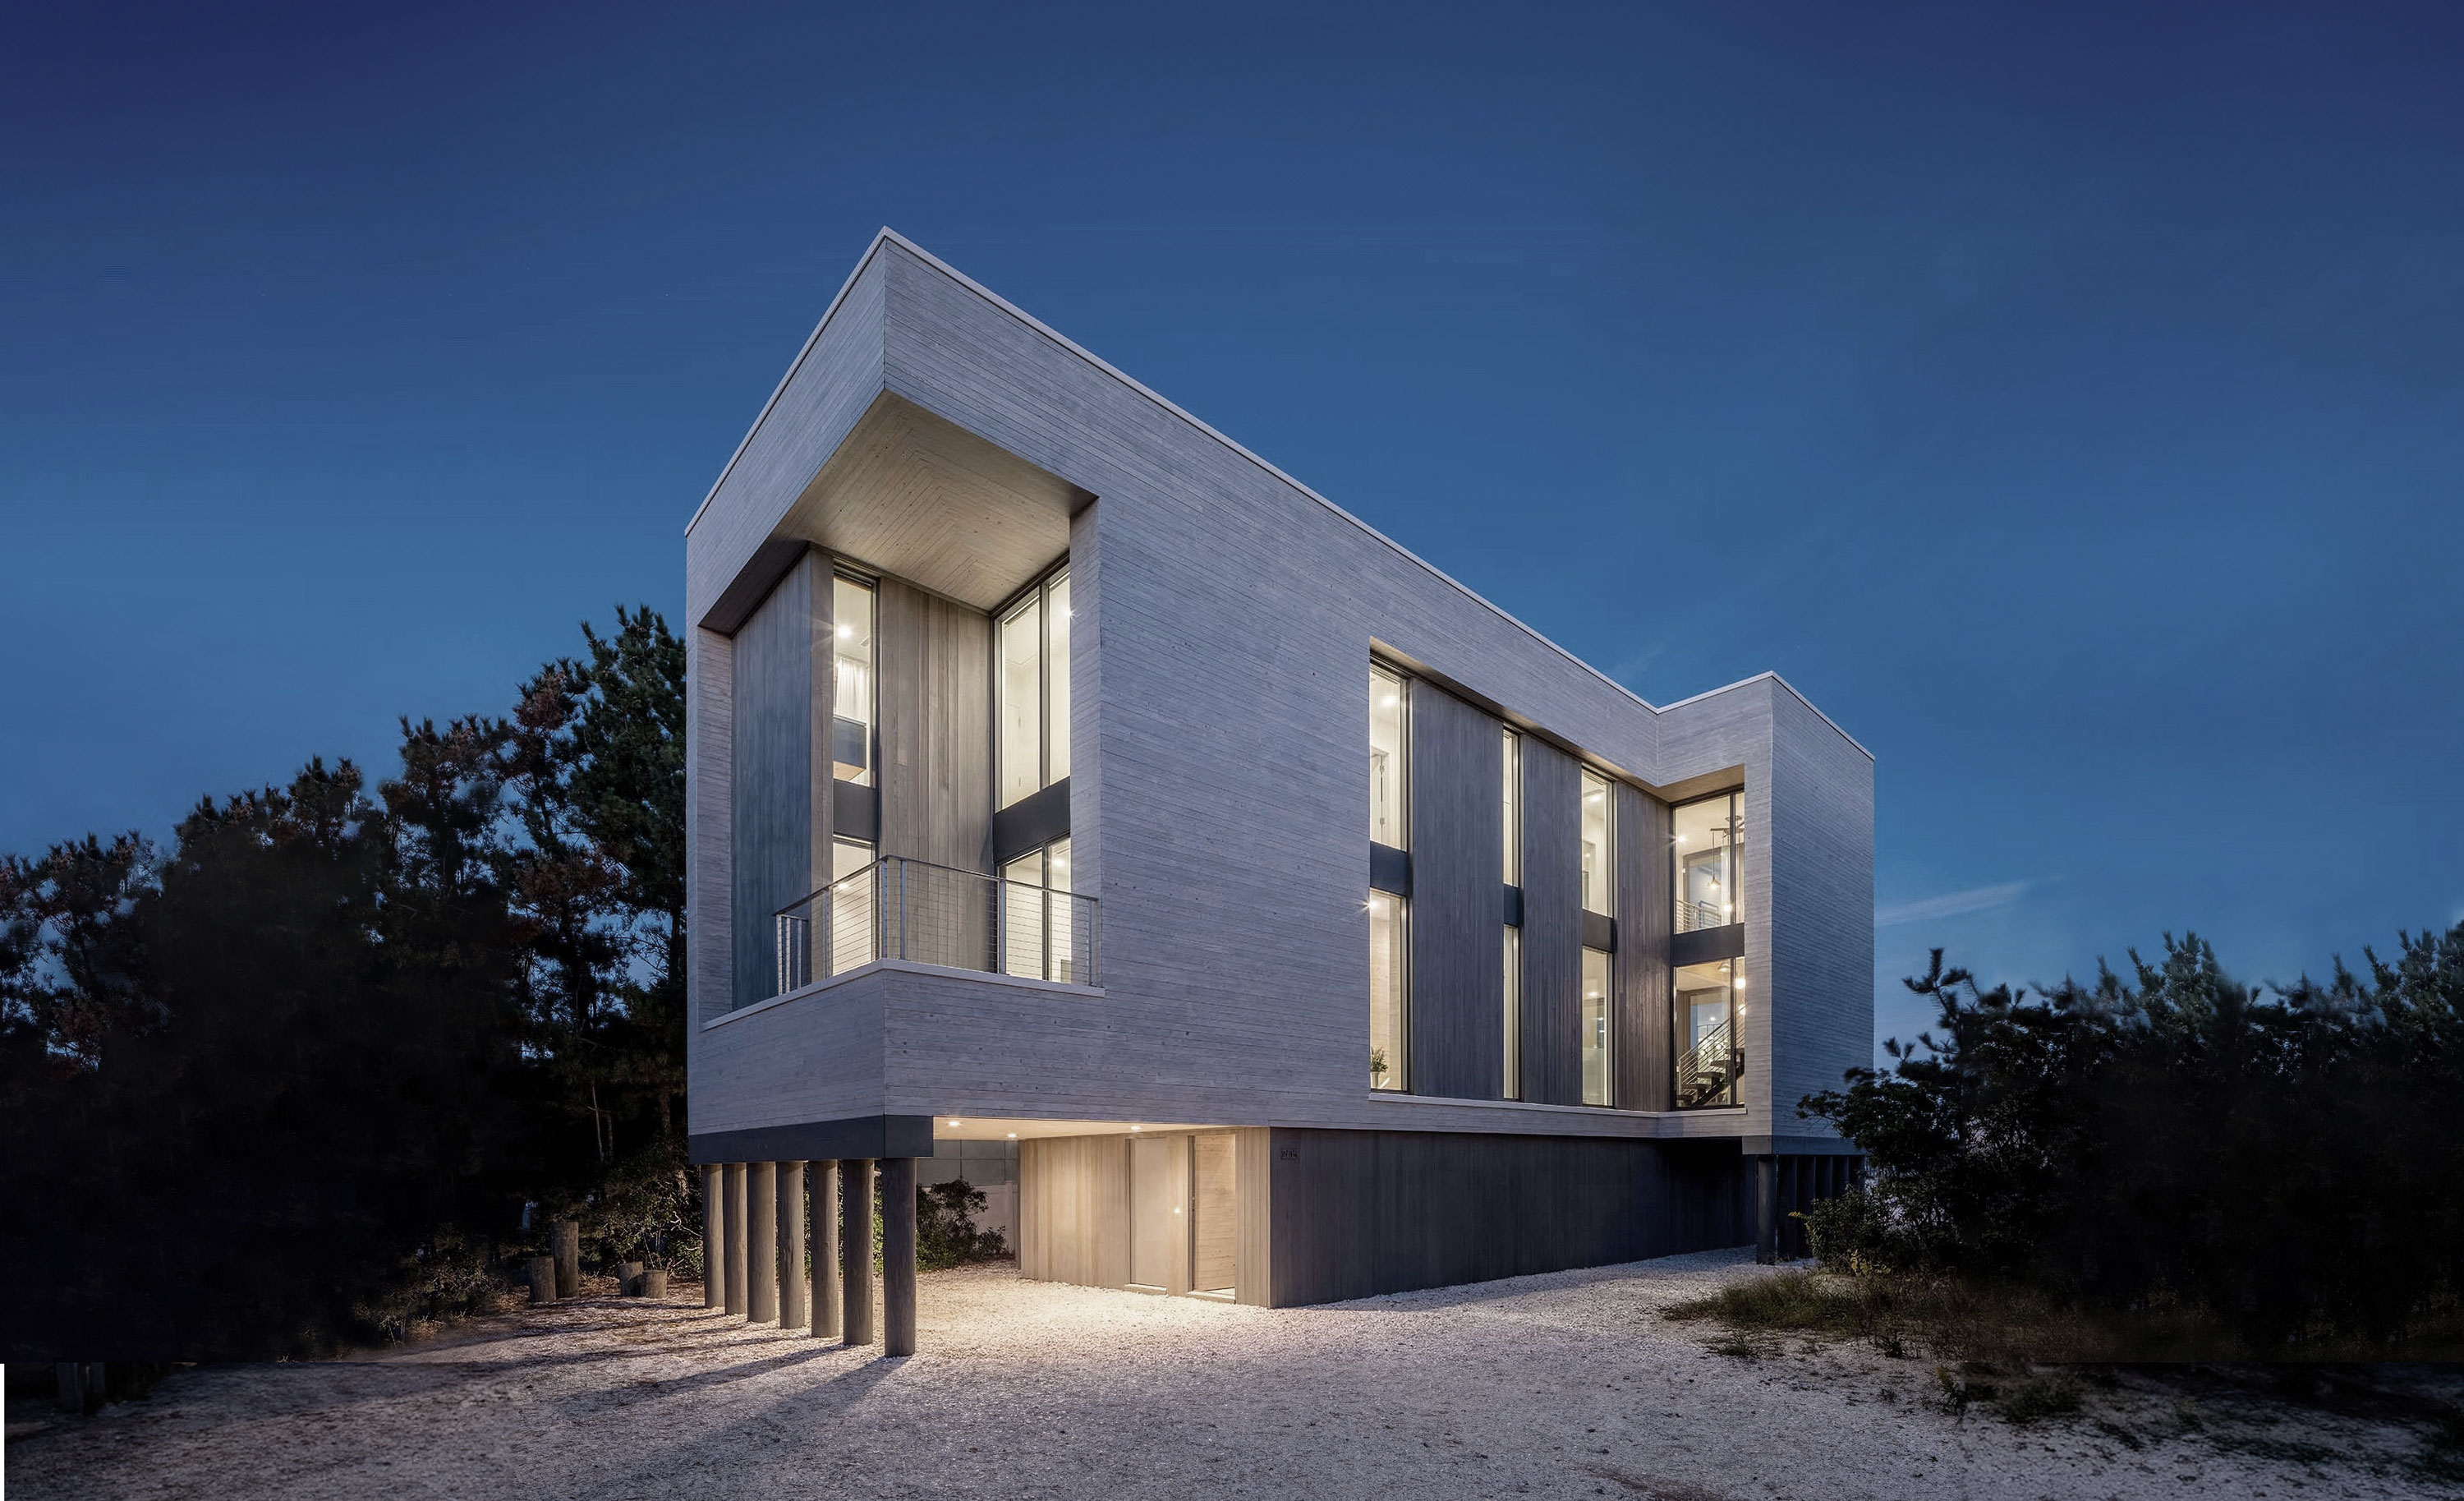 Exterior photo of the Beach Haven Residence by Specht Novak Architects. Shot by Taggart Sorenson featuring the angular facade of the home in relation to its beach surroundings.